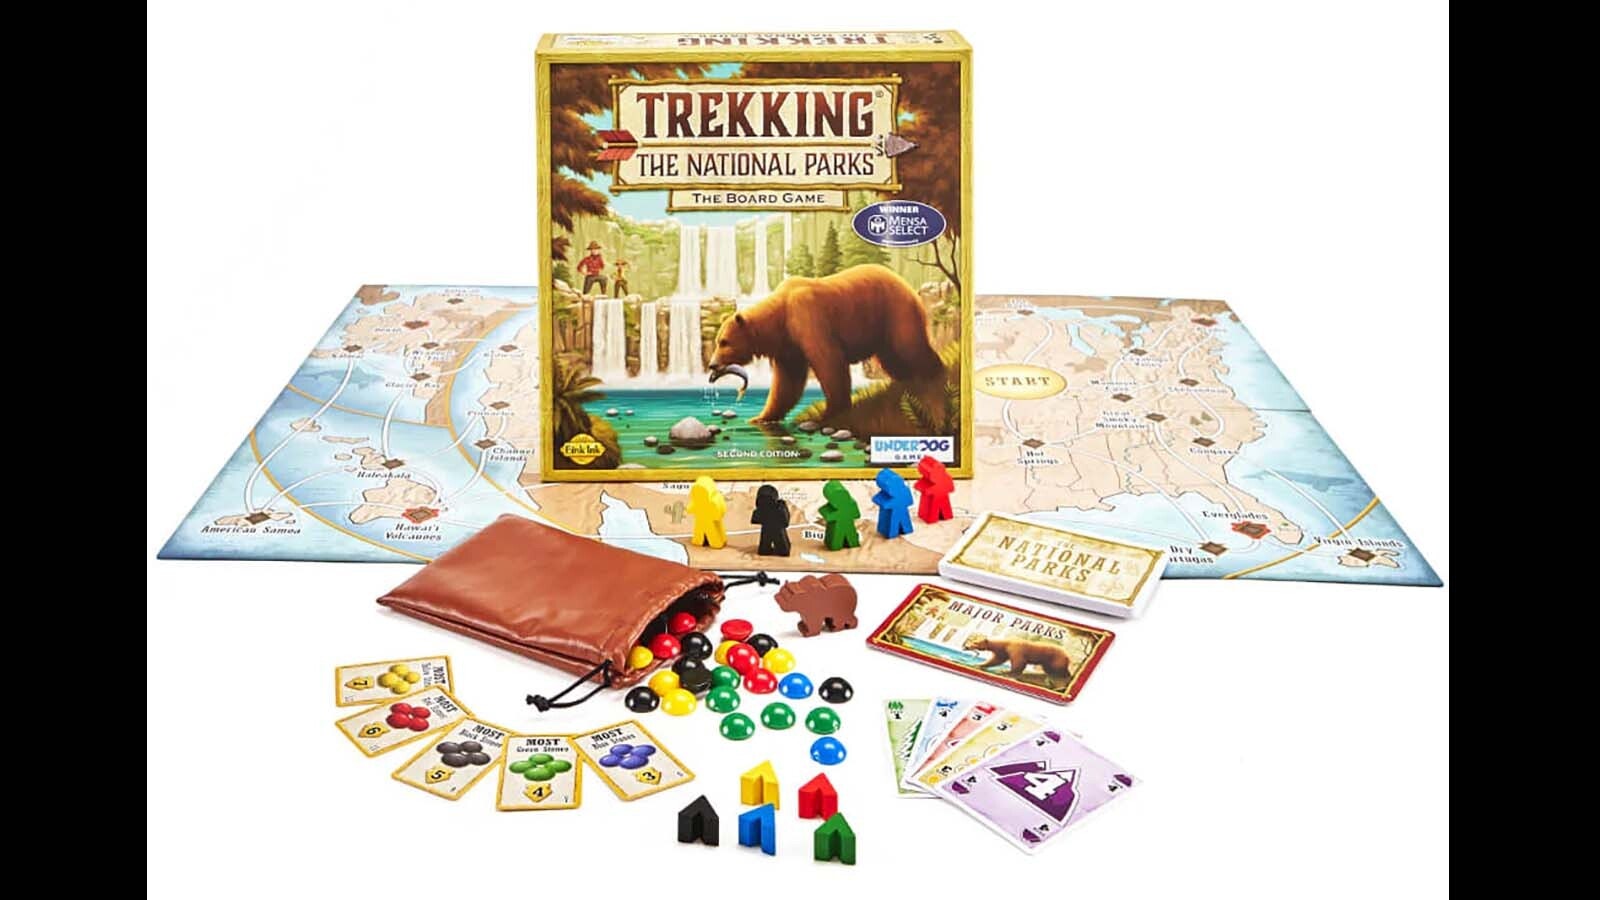 What began as a retirement goal for a couple to visit 40 national parks in 40 months has become an award-winning board game that's sole more than 1 million units.